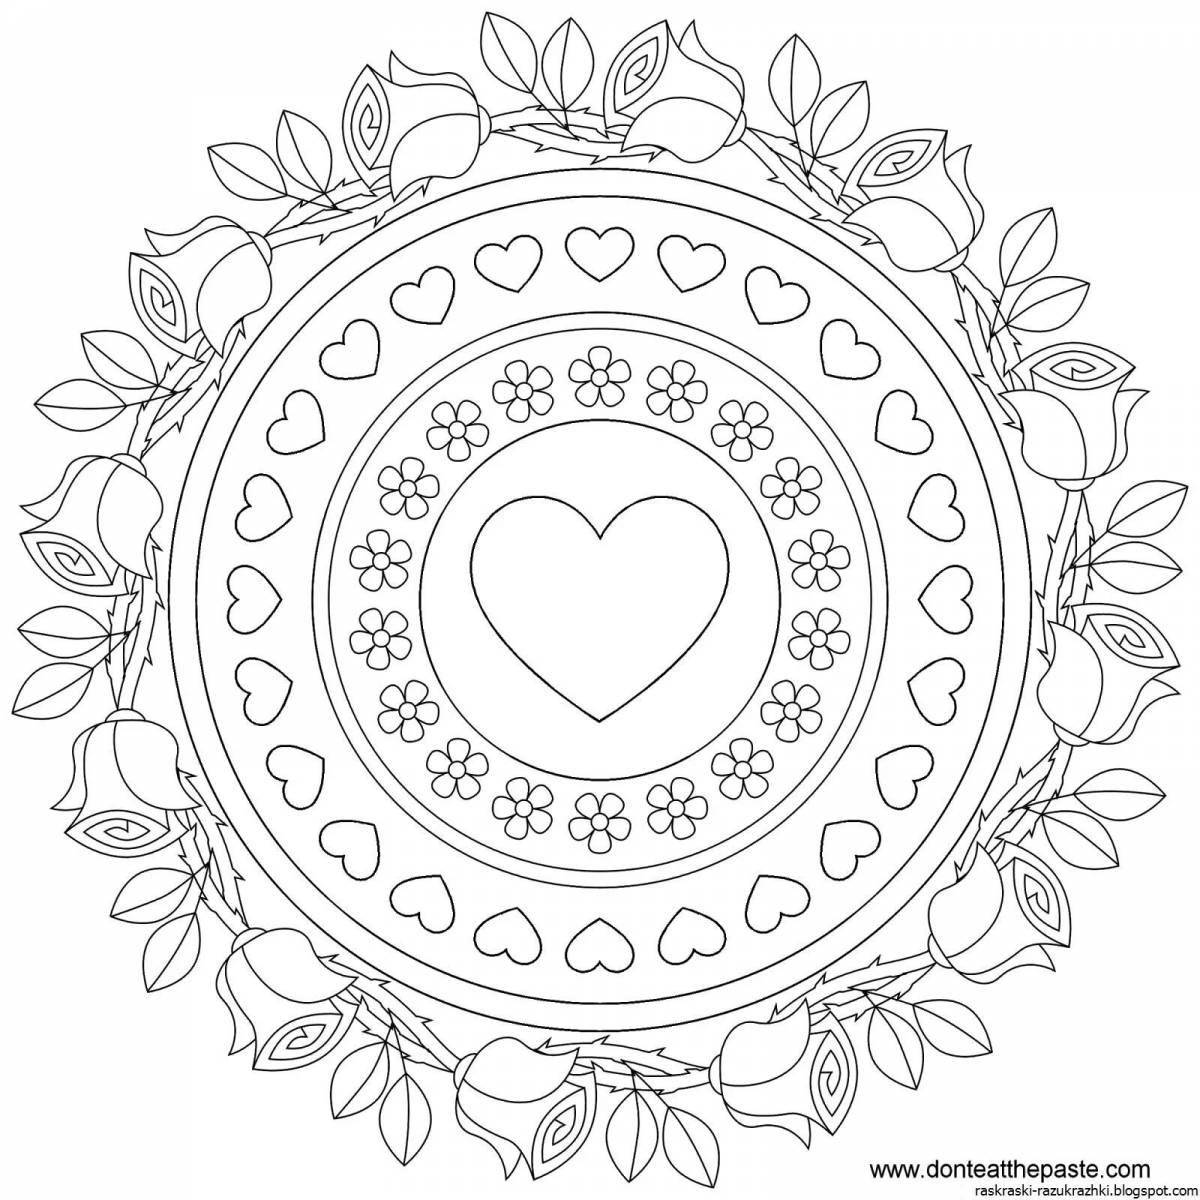 Magic mantra coloring pages